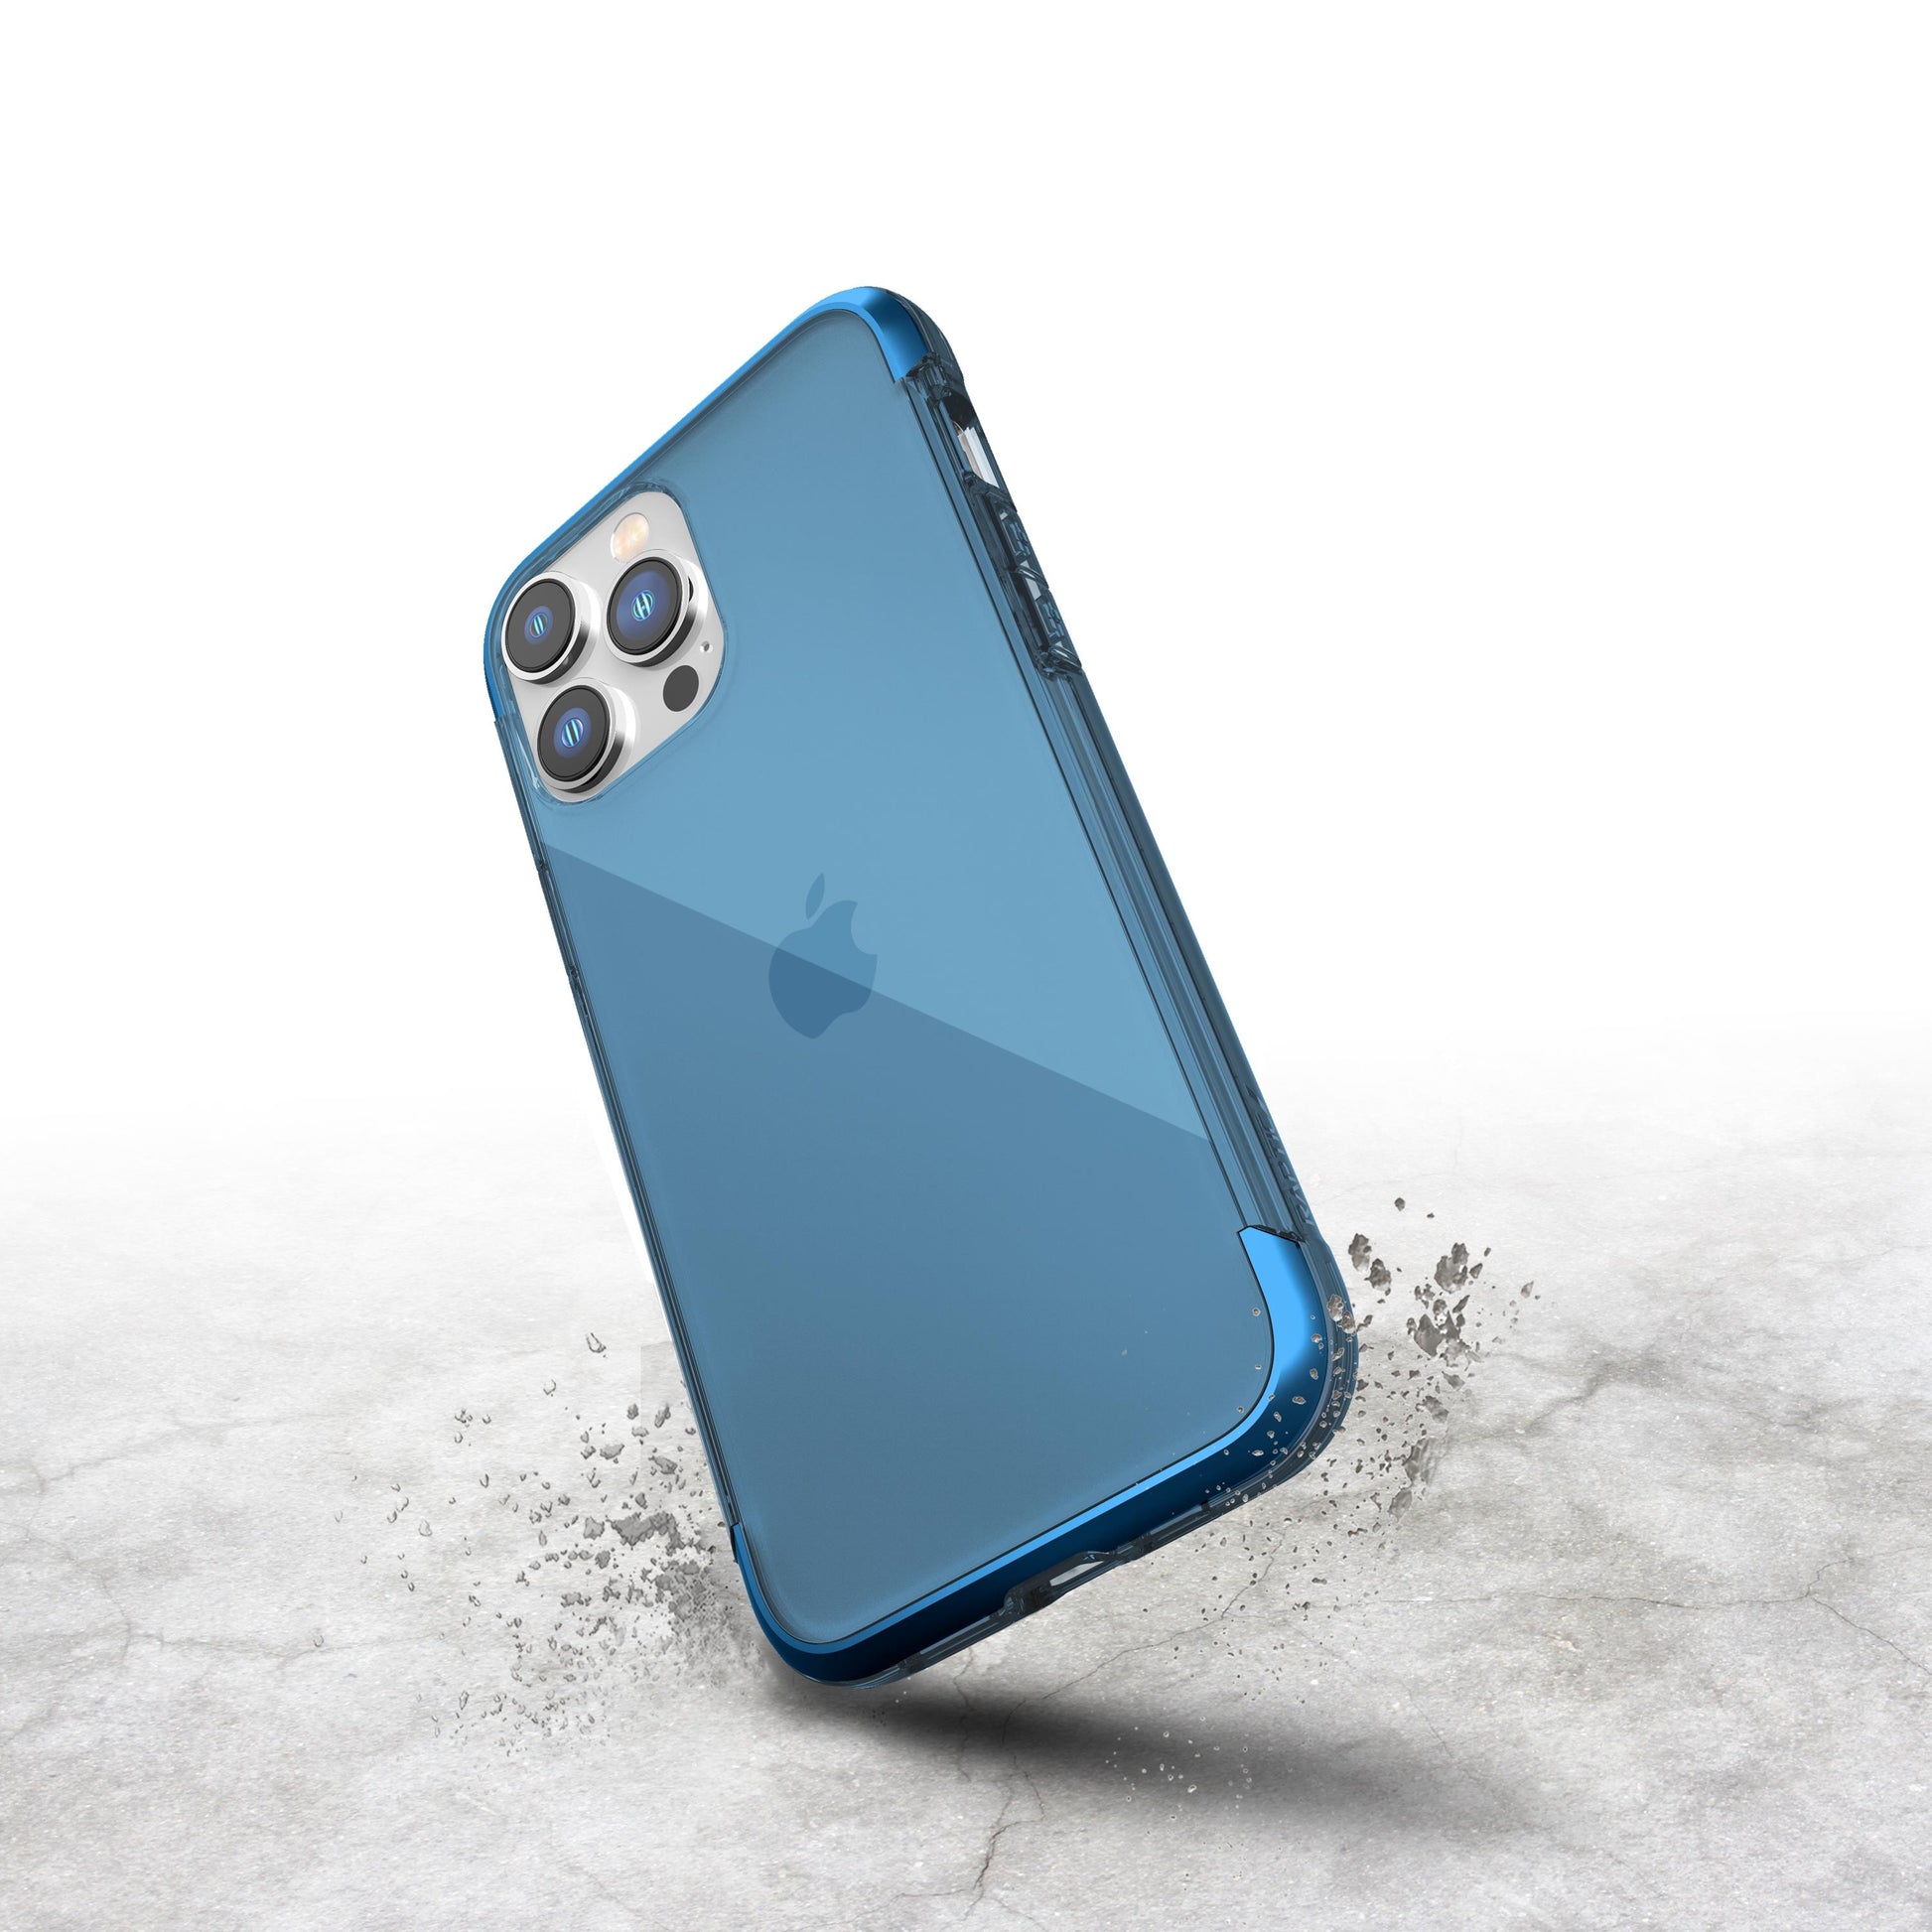 A protective iPhone 14 Pro Air Case - Raptic Air with aluminium alloy strength for iPhone 11 Pro on a concrete surface.